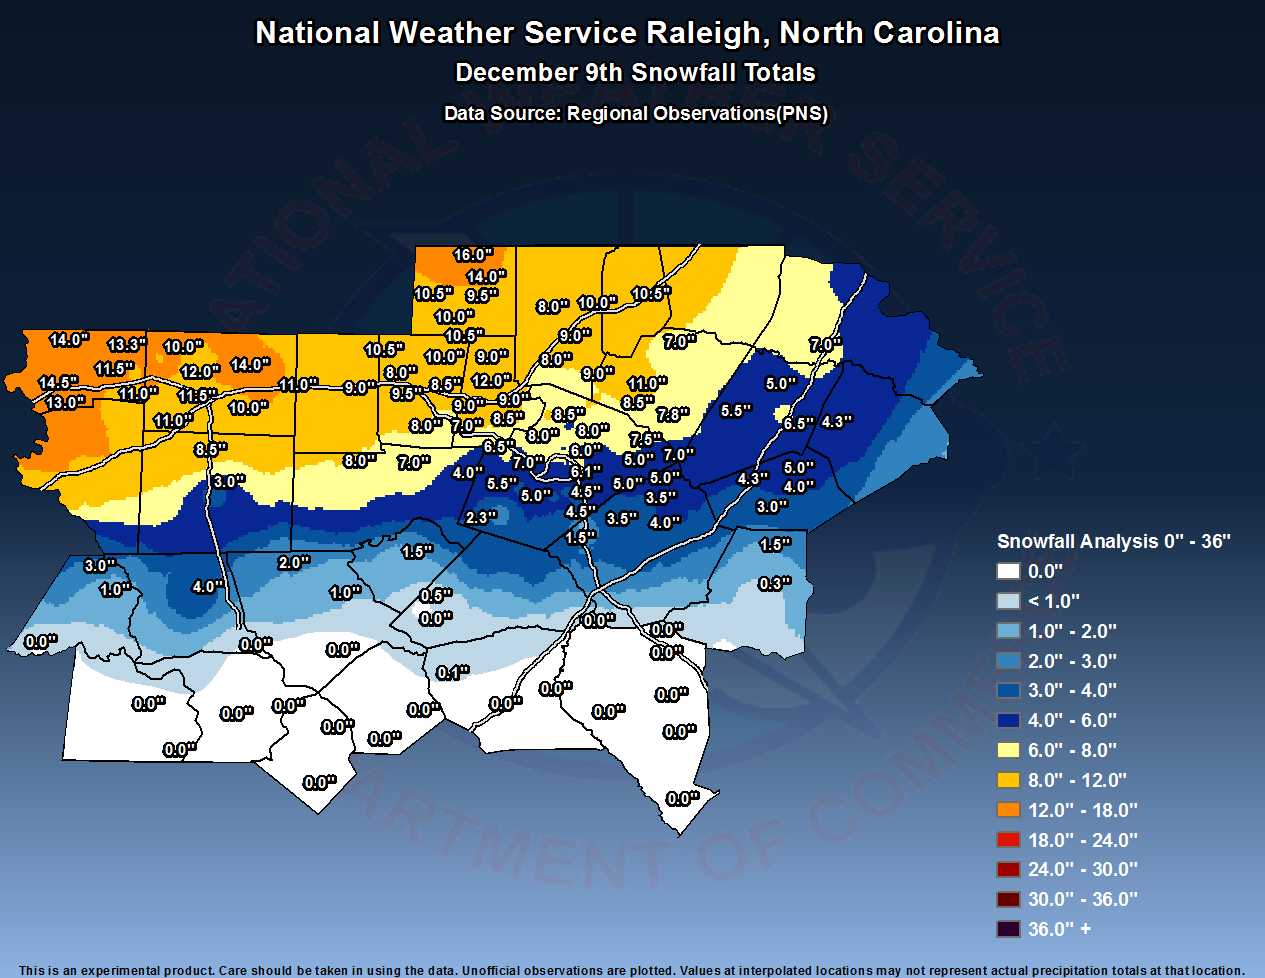 December 9th snow and ice totals